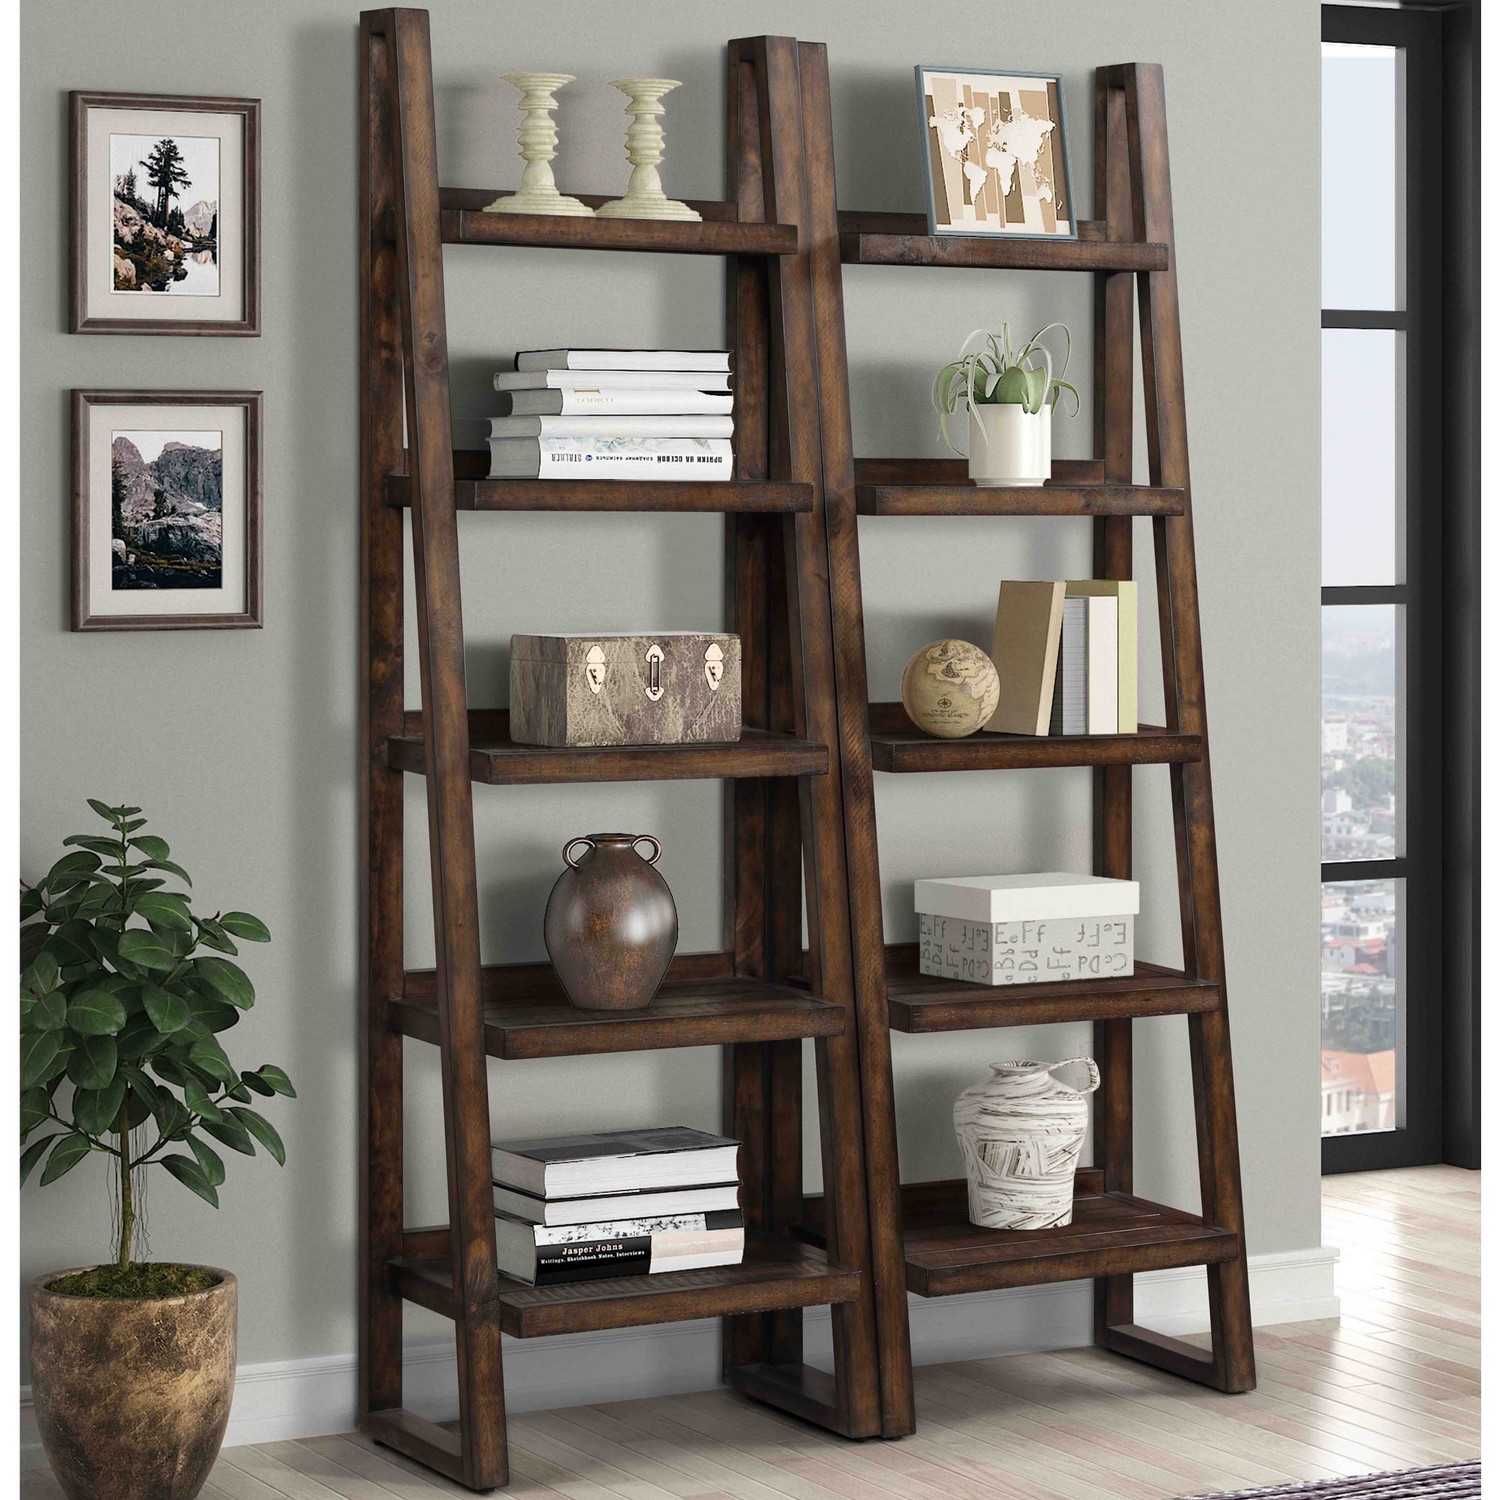 Parker House Tempe Pair of Etagere Bookcases - Tobacco